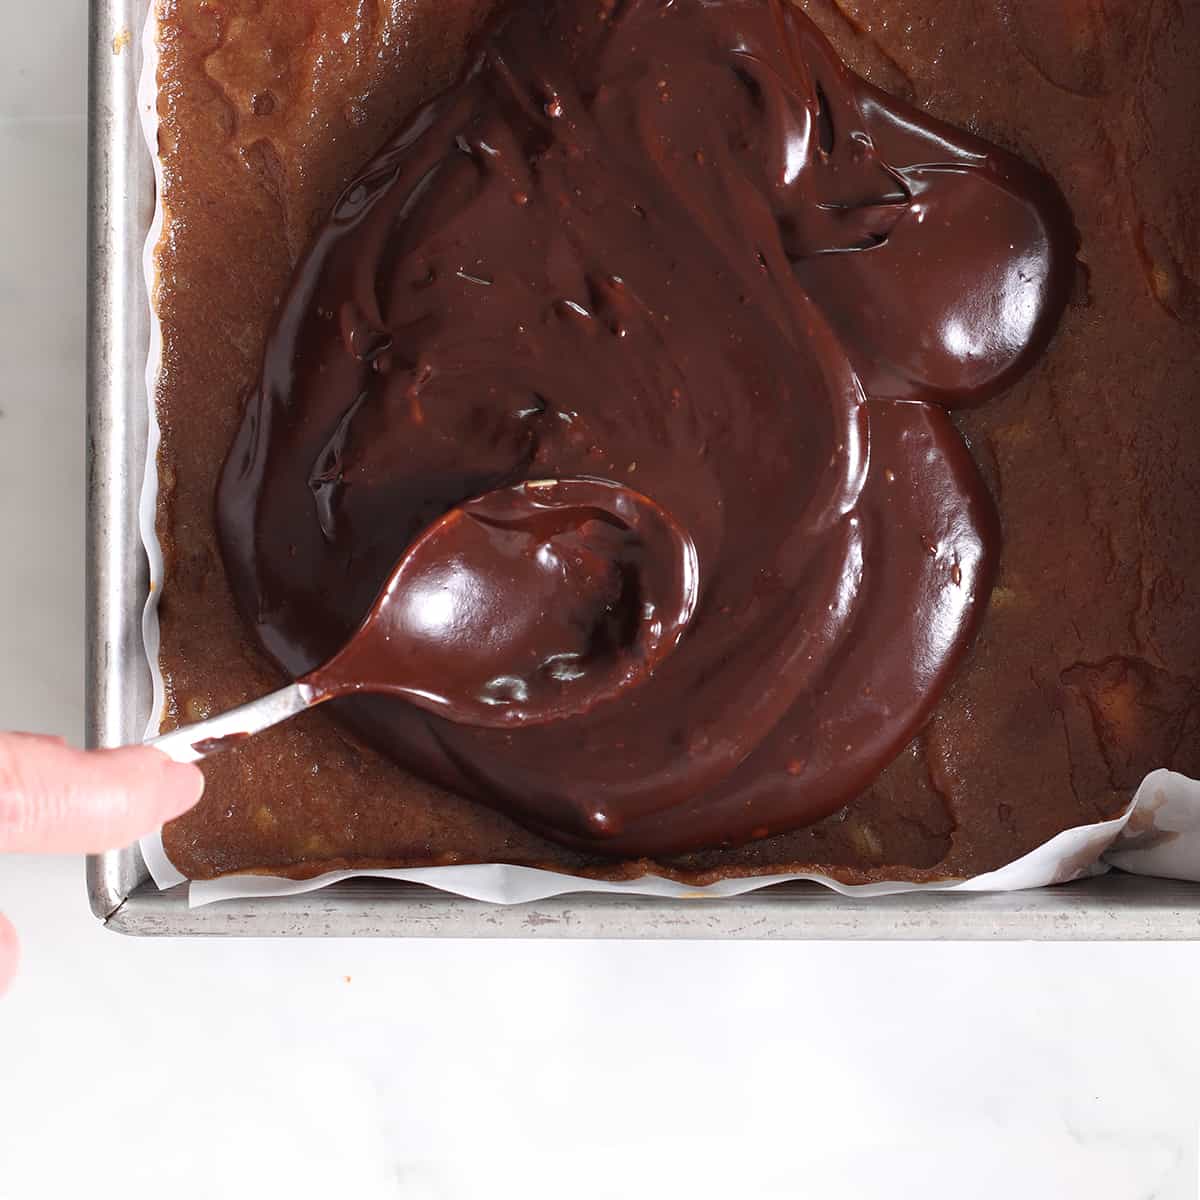 add melted chocolate to the top of chocolate coconut bars.